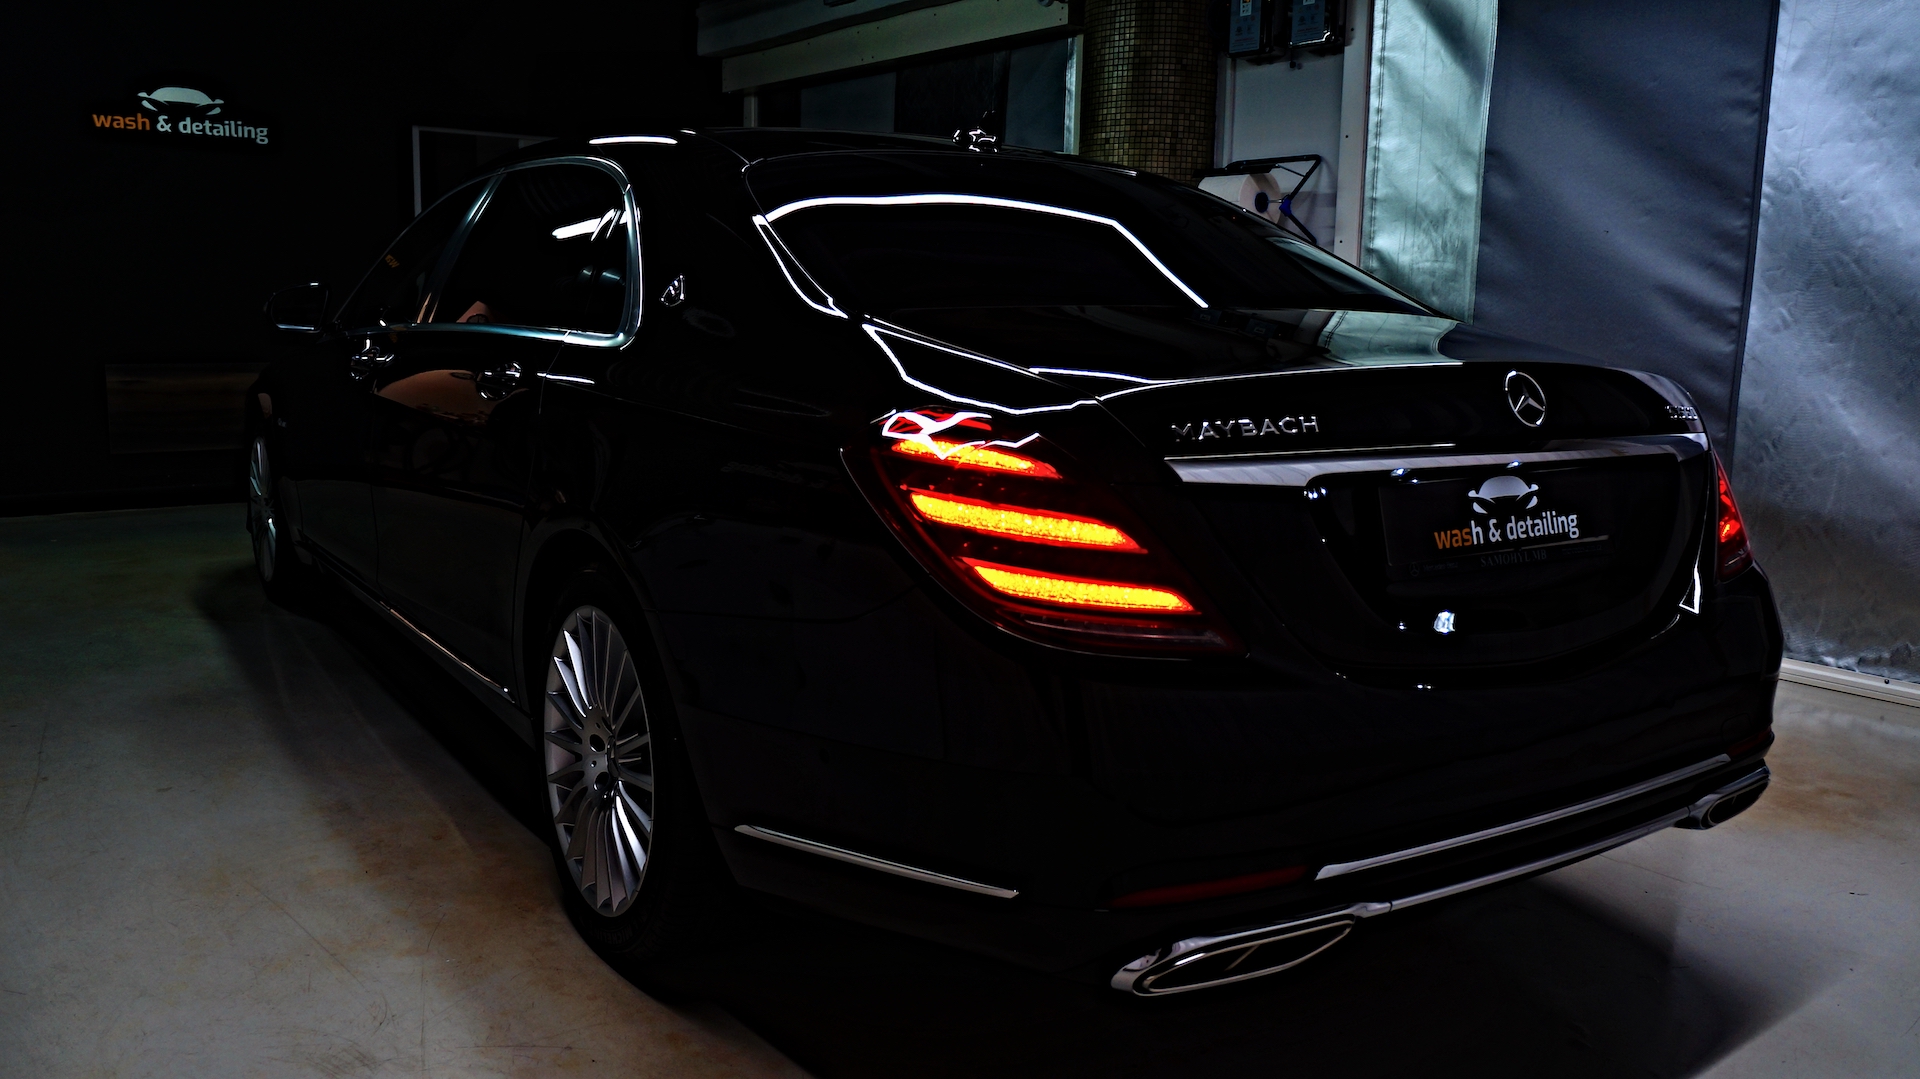 Mercedes-Maybach S560